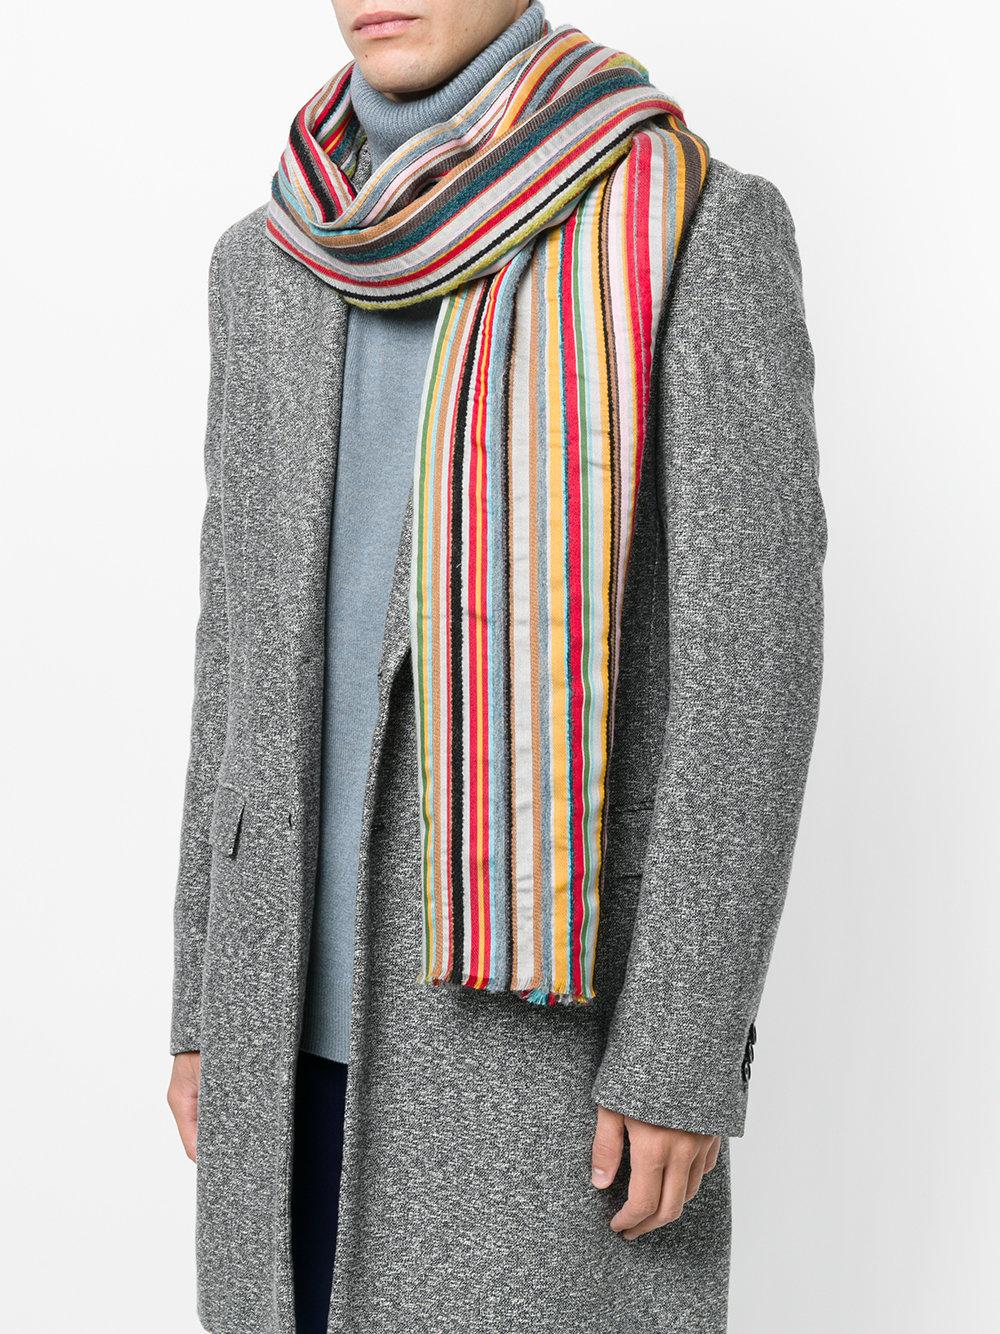 Paul Smith Striped Scarf for Men - Lyst